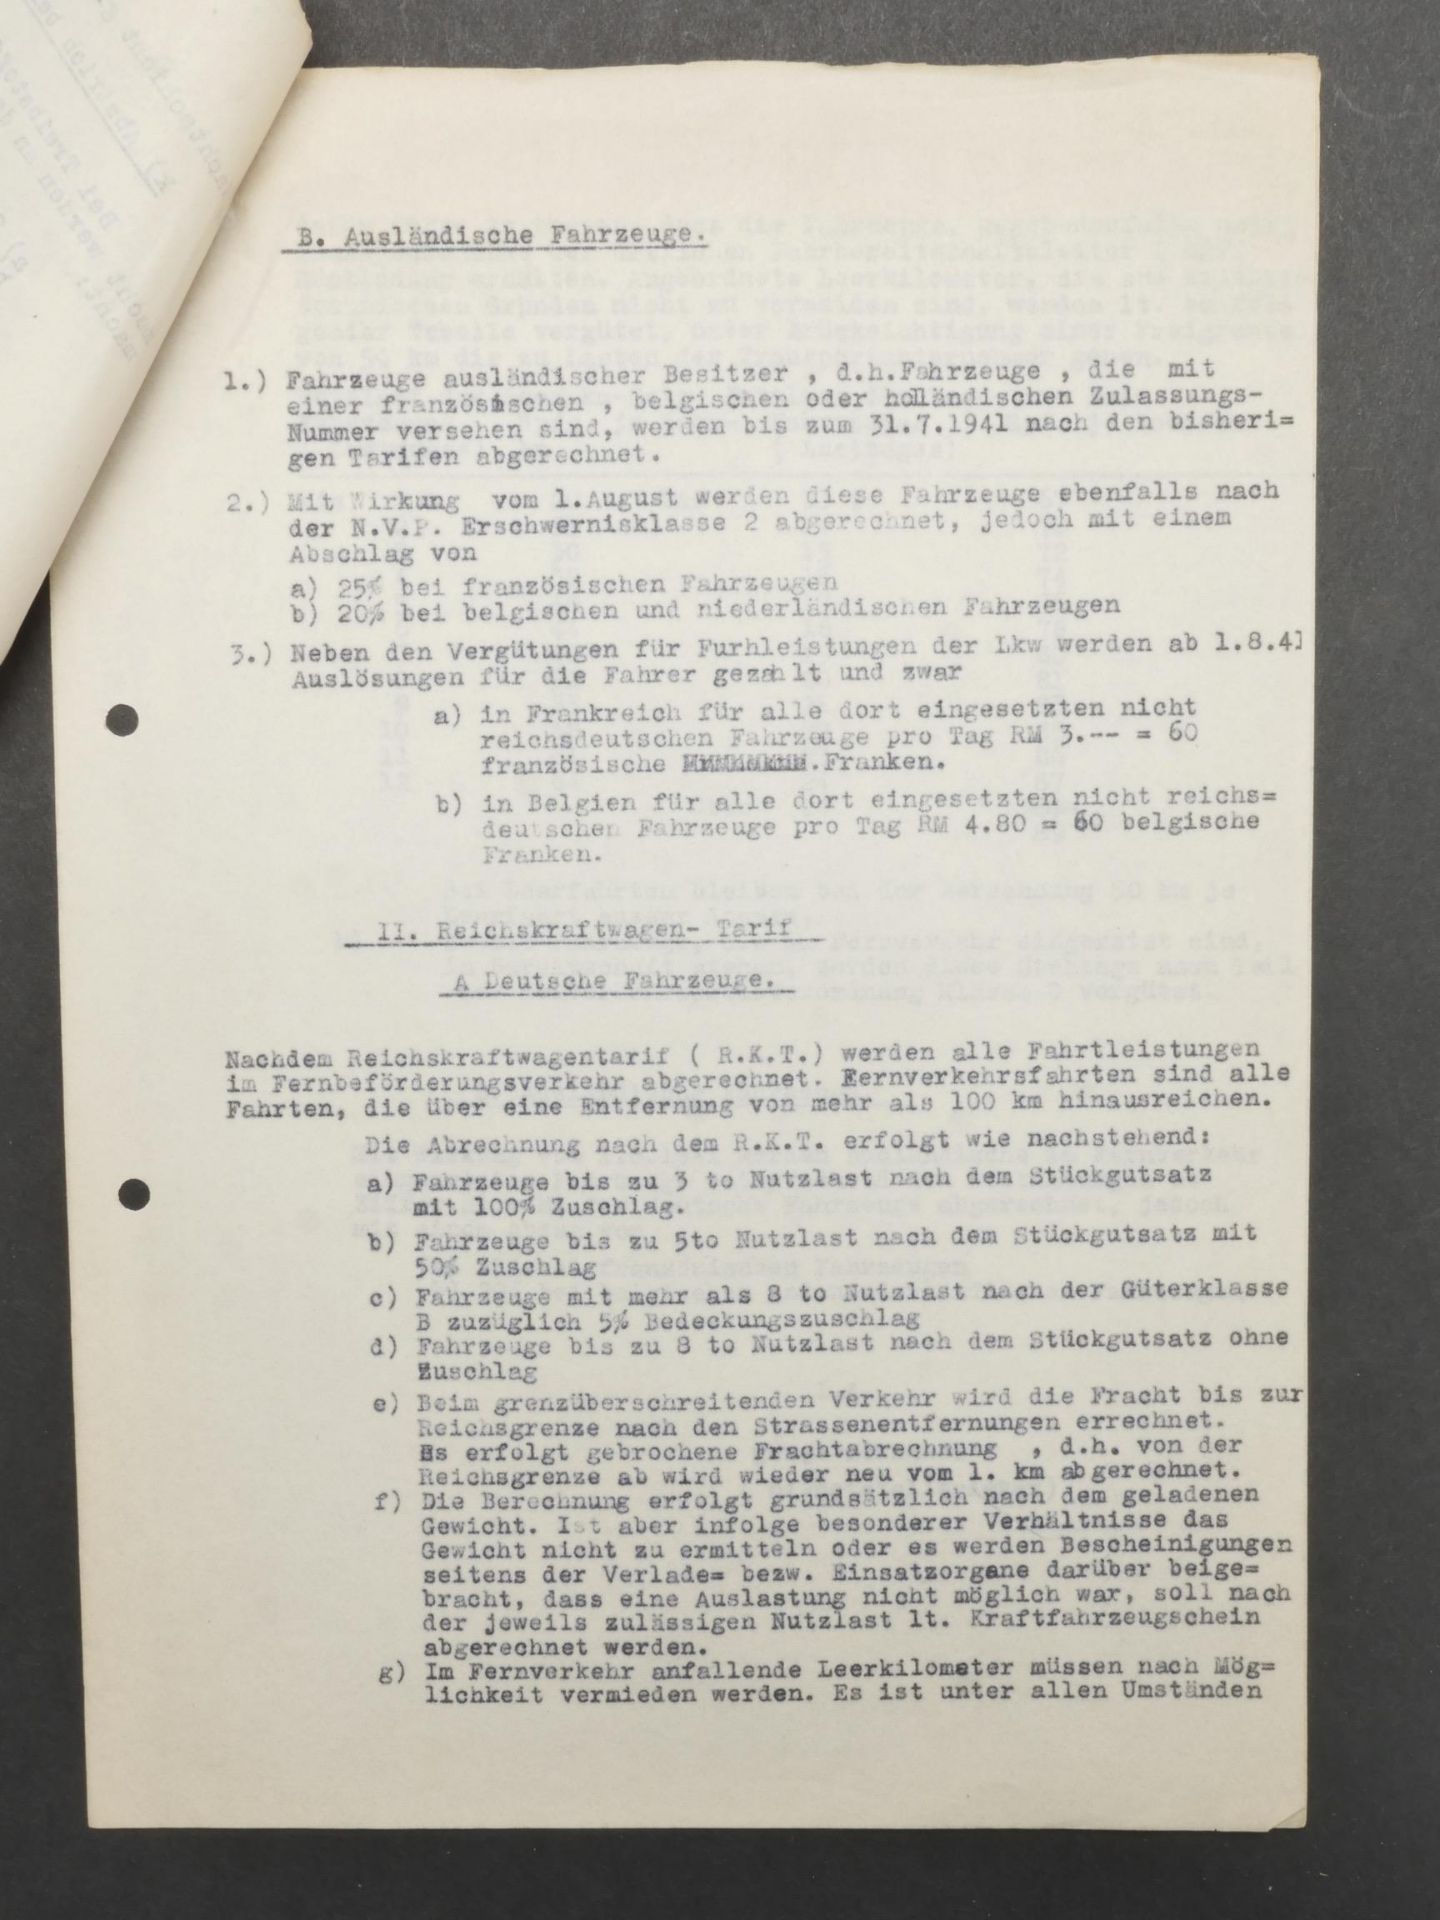 Documents de l Organisation Todt. Documents from the Todt Organization. - Image 4 of 5